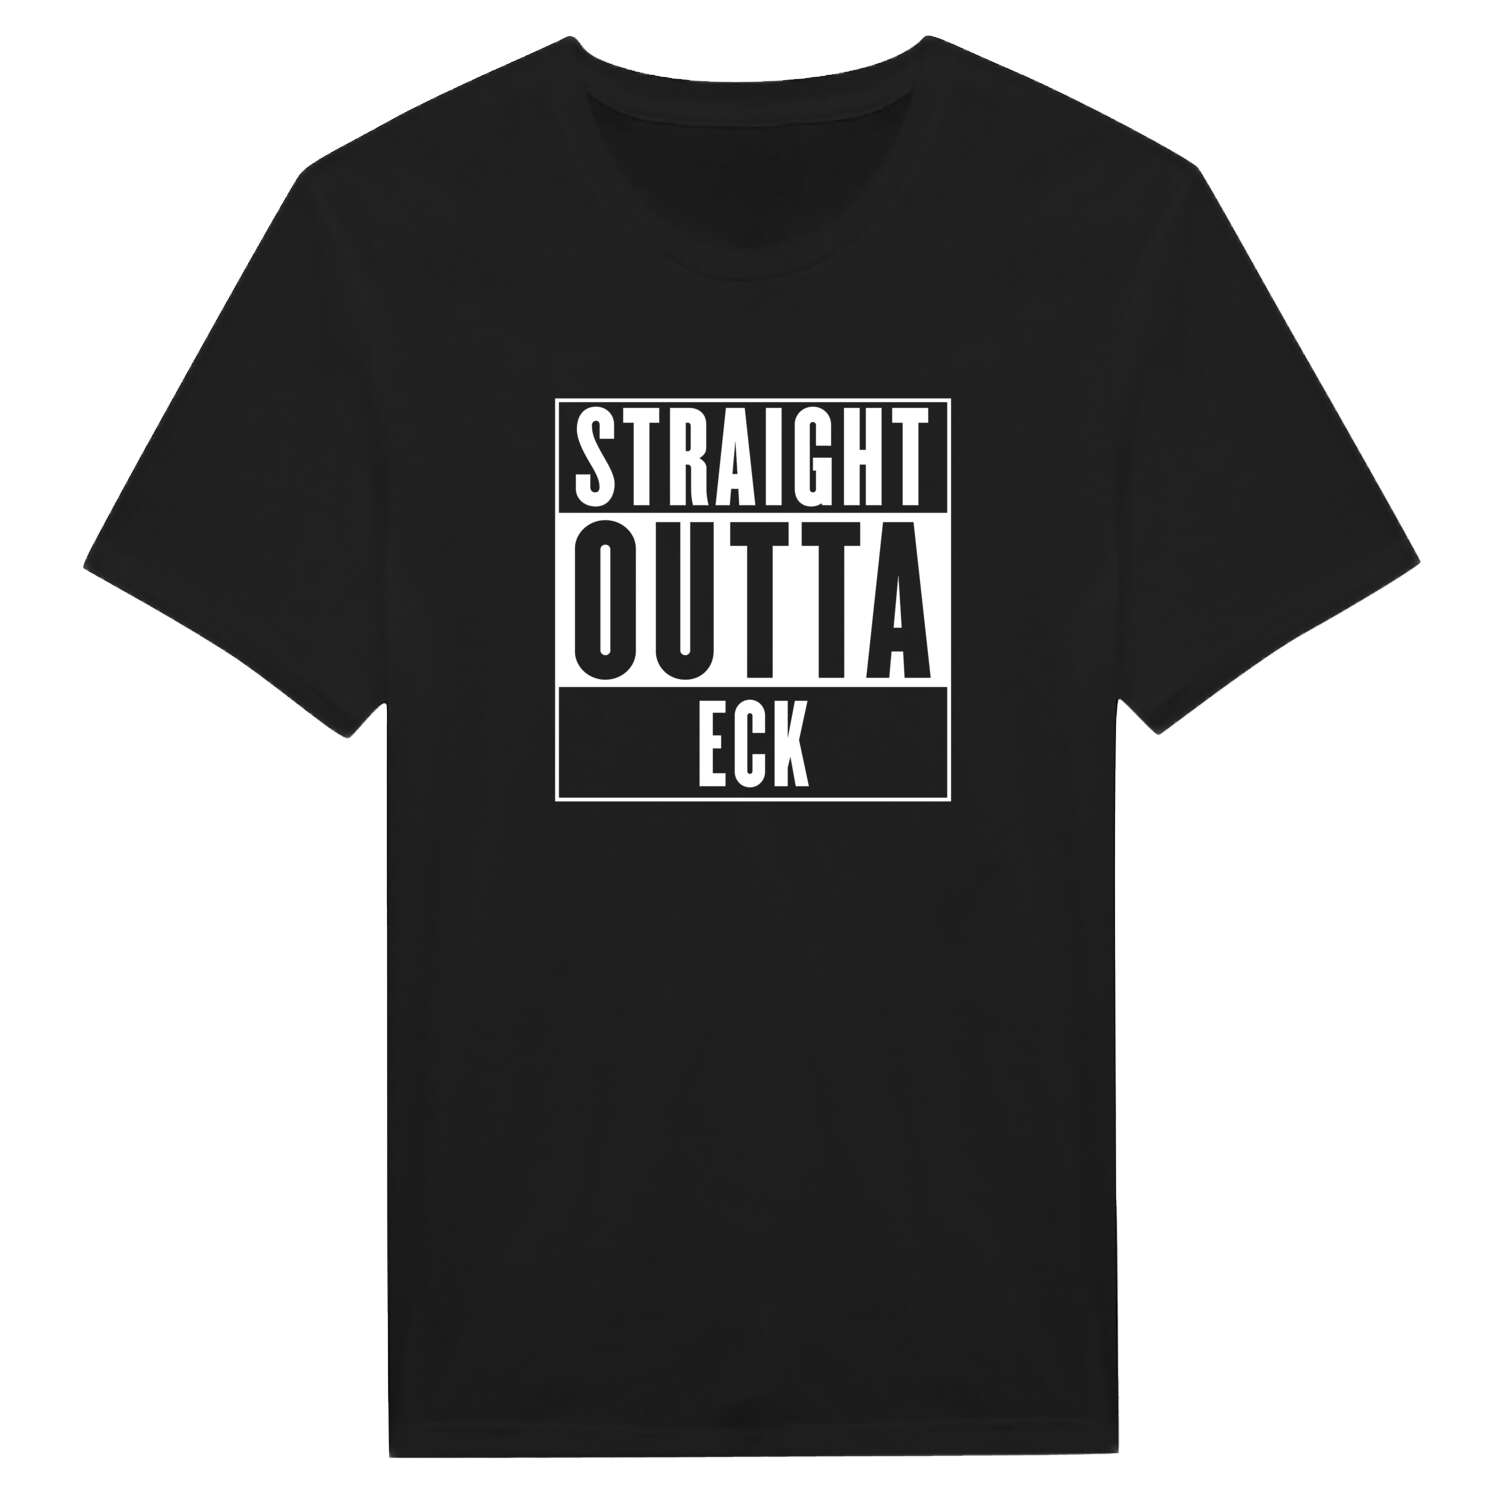 Eck T-Shirt »Straight Outta«